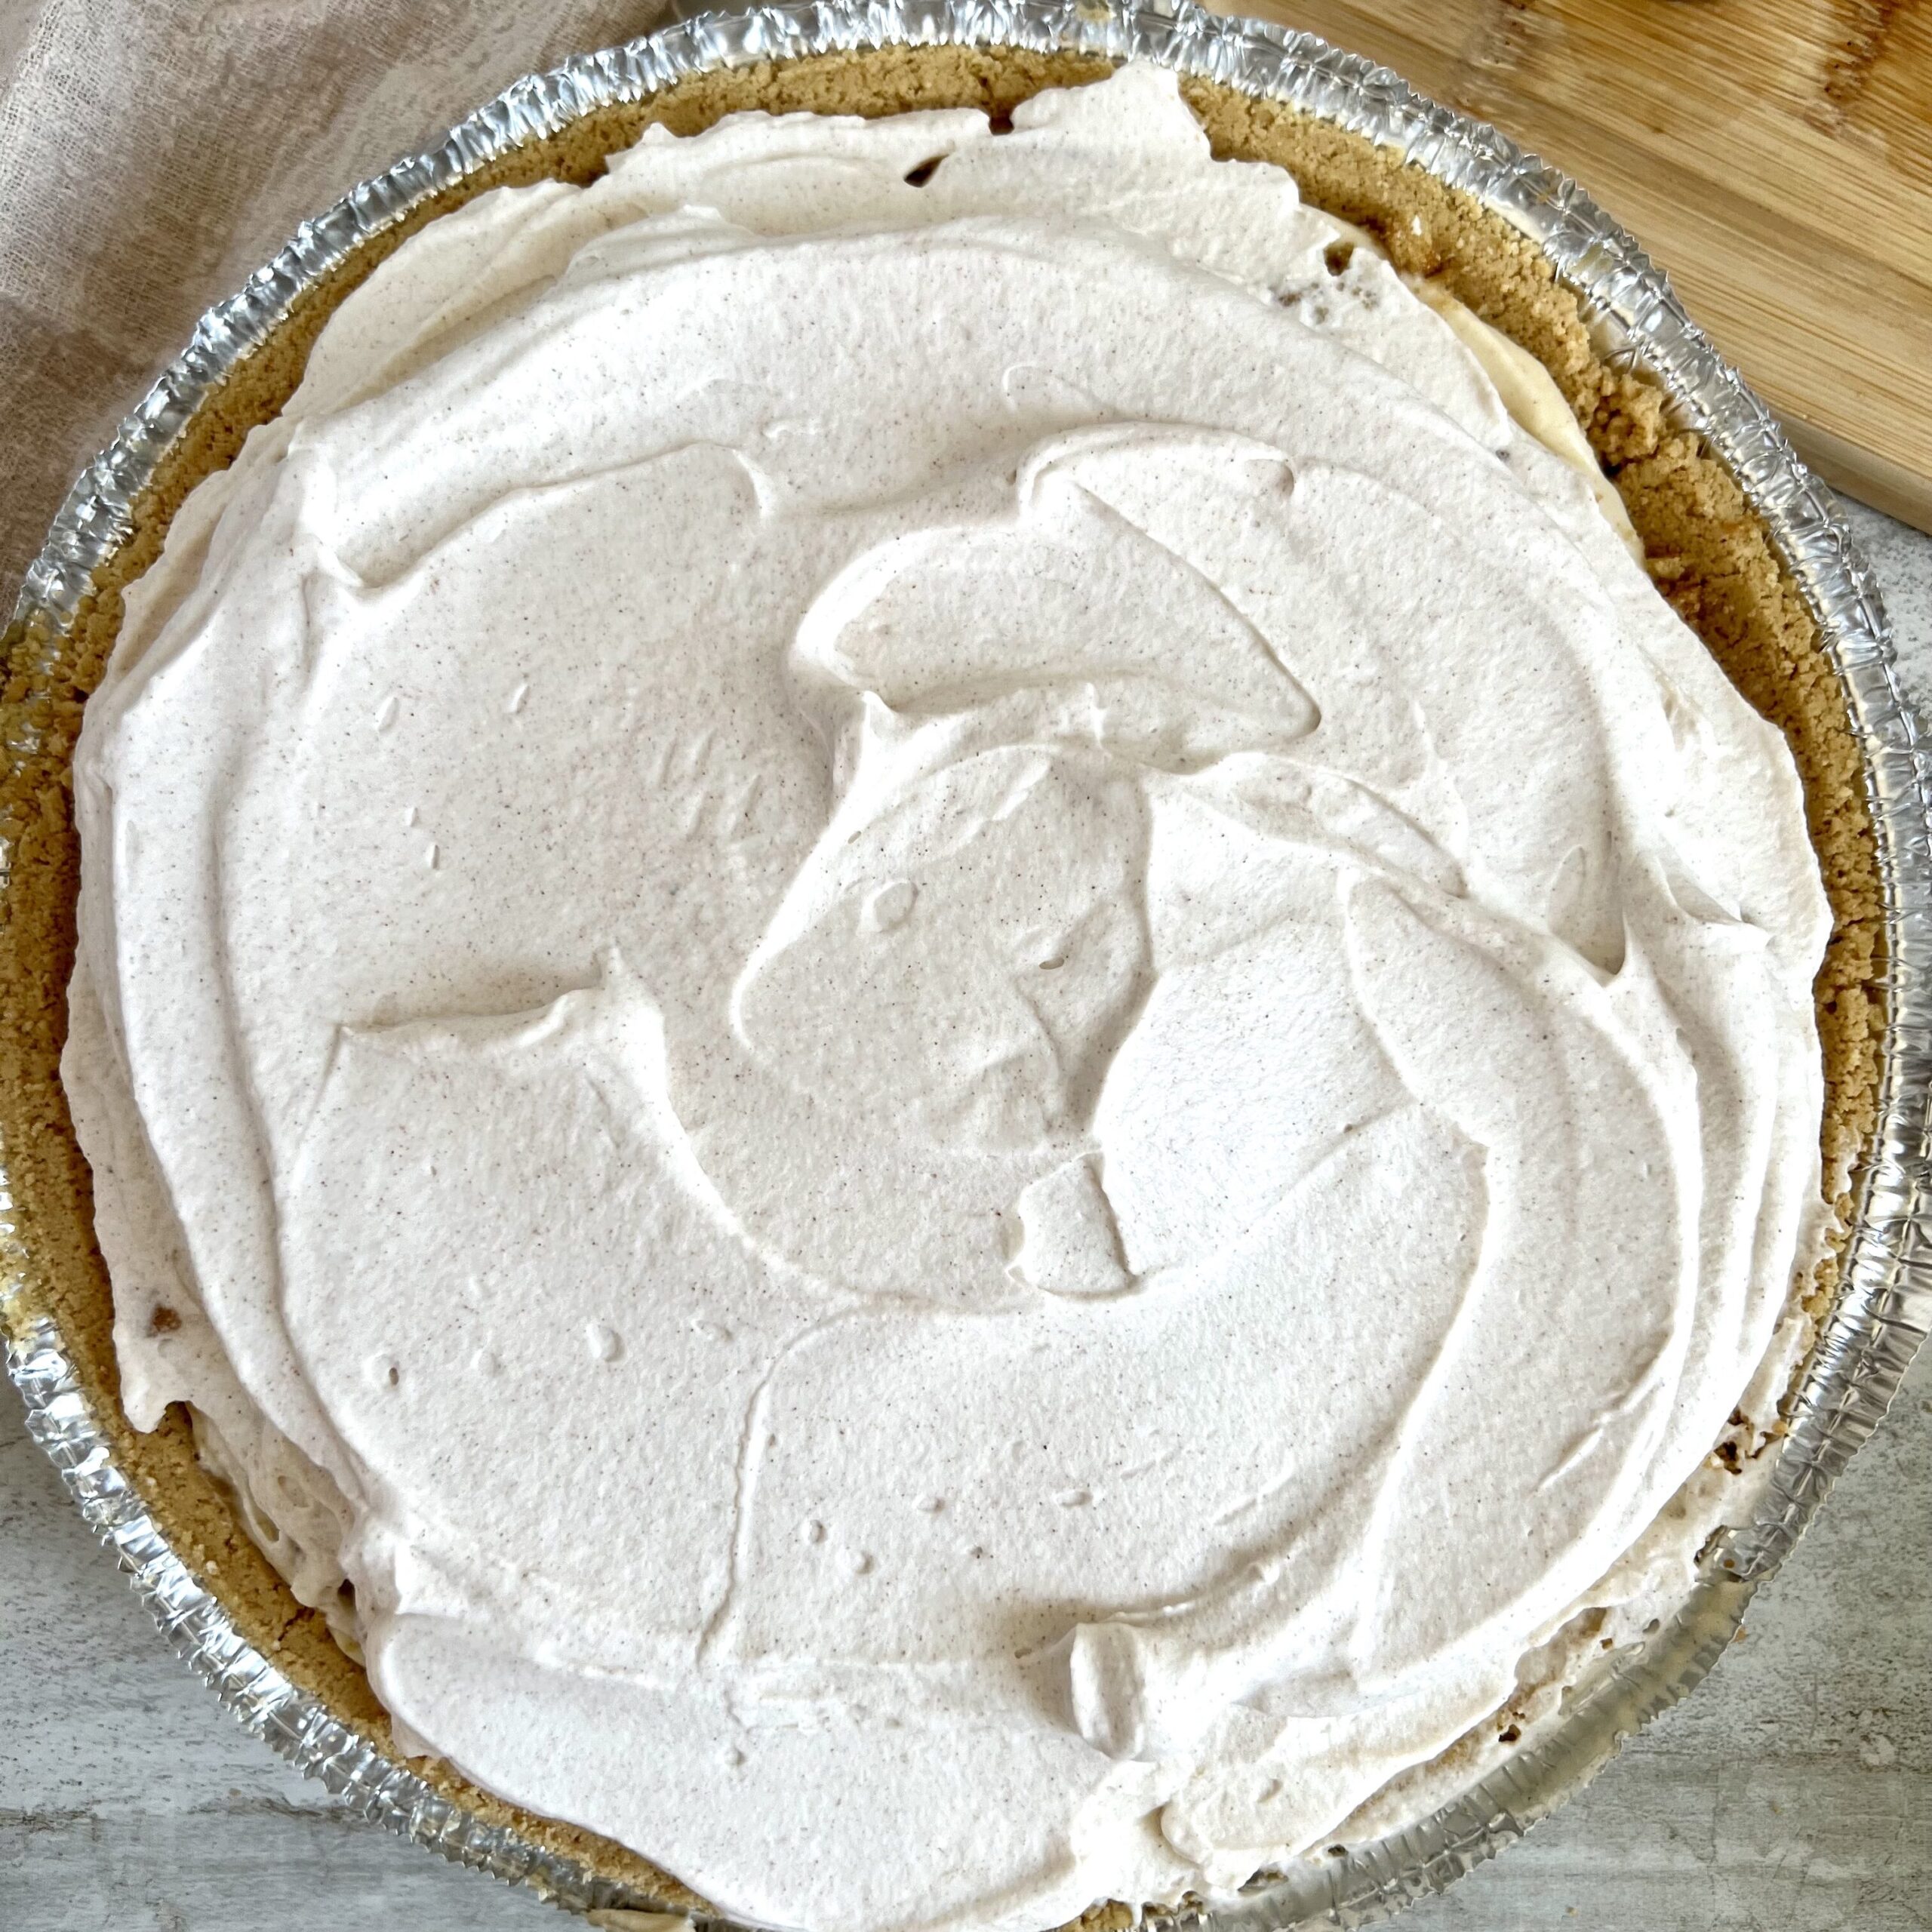 Banana Pudding Pie topped with whipped cream